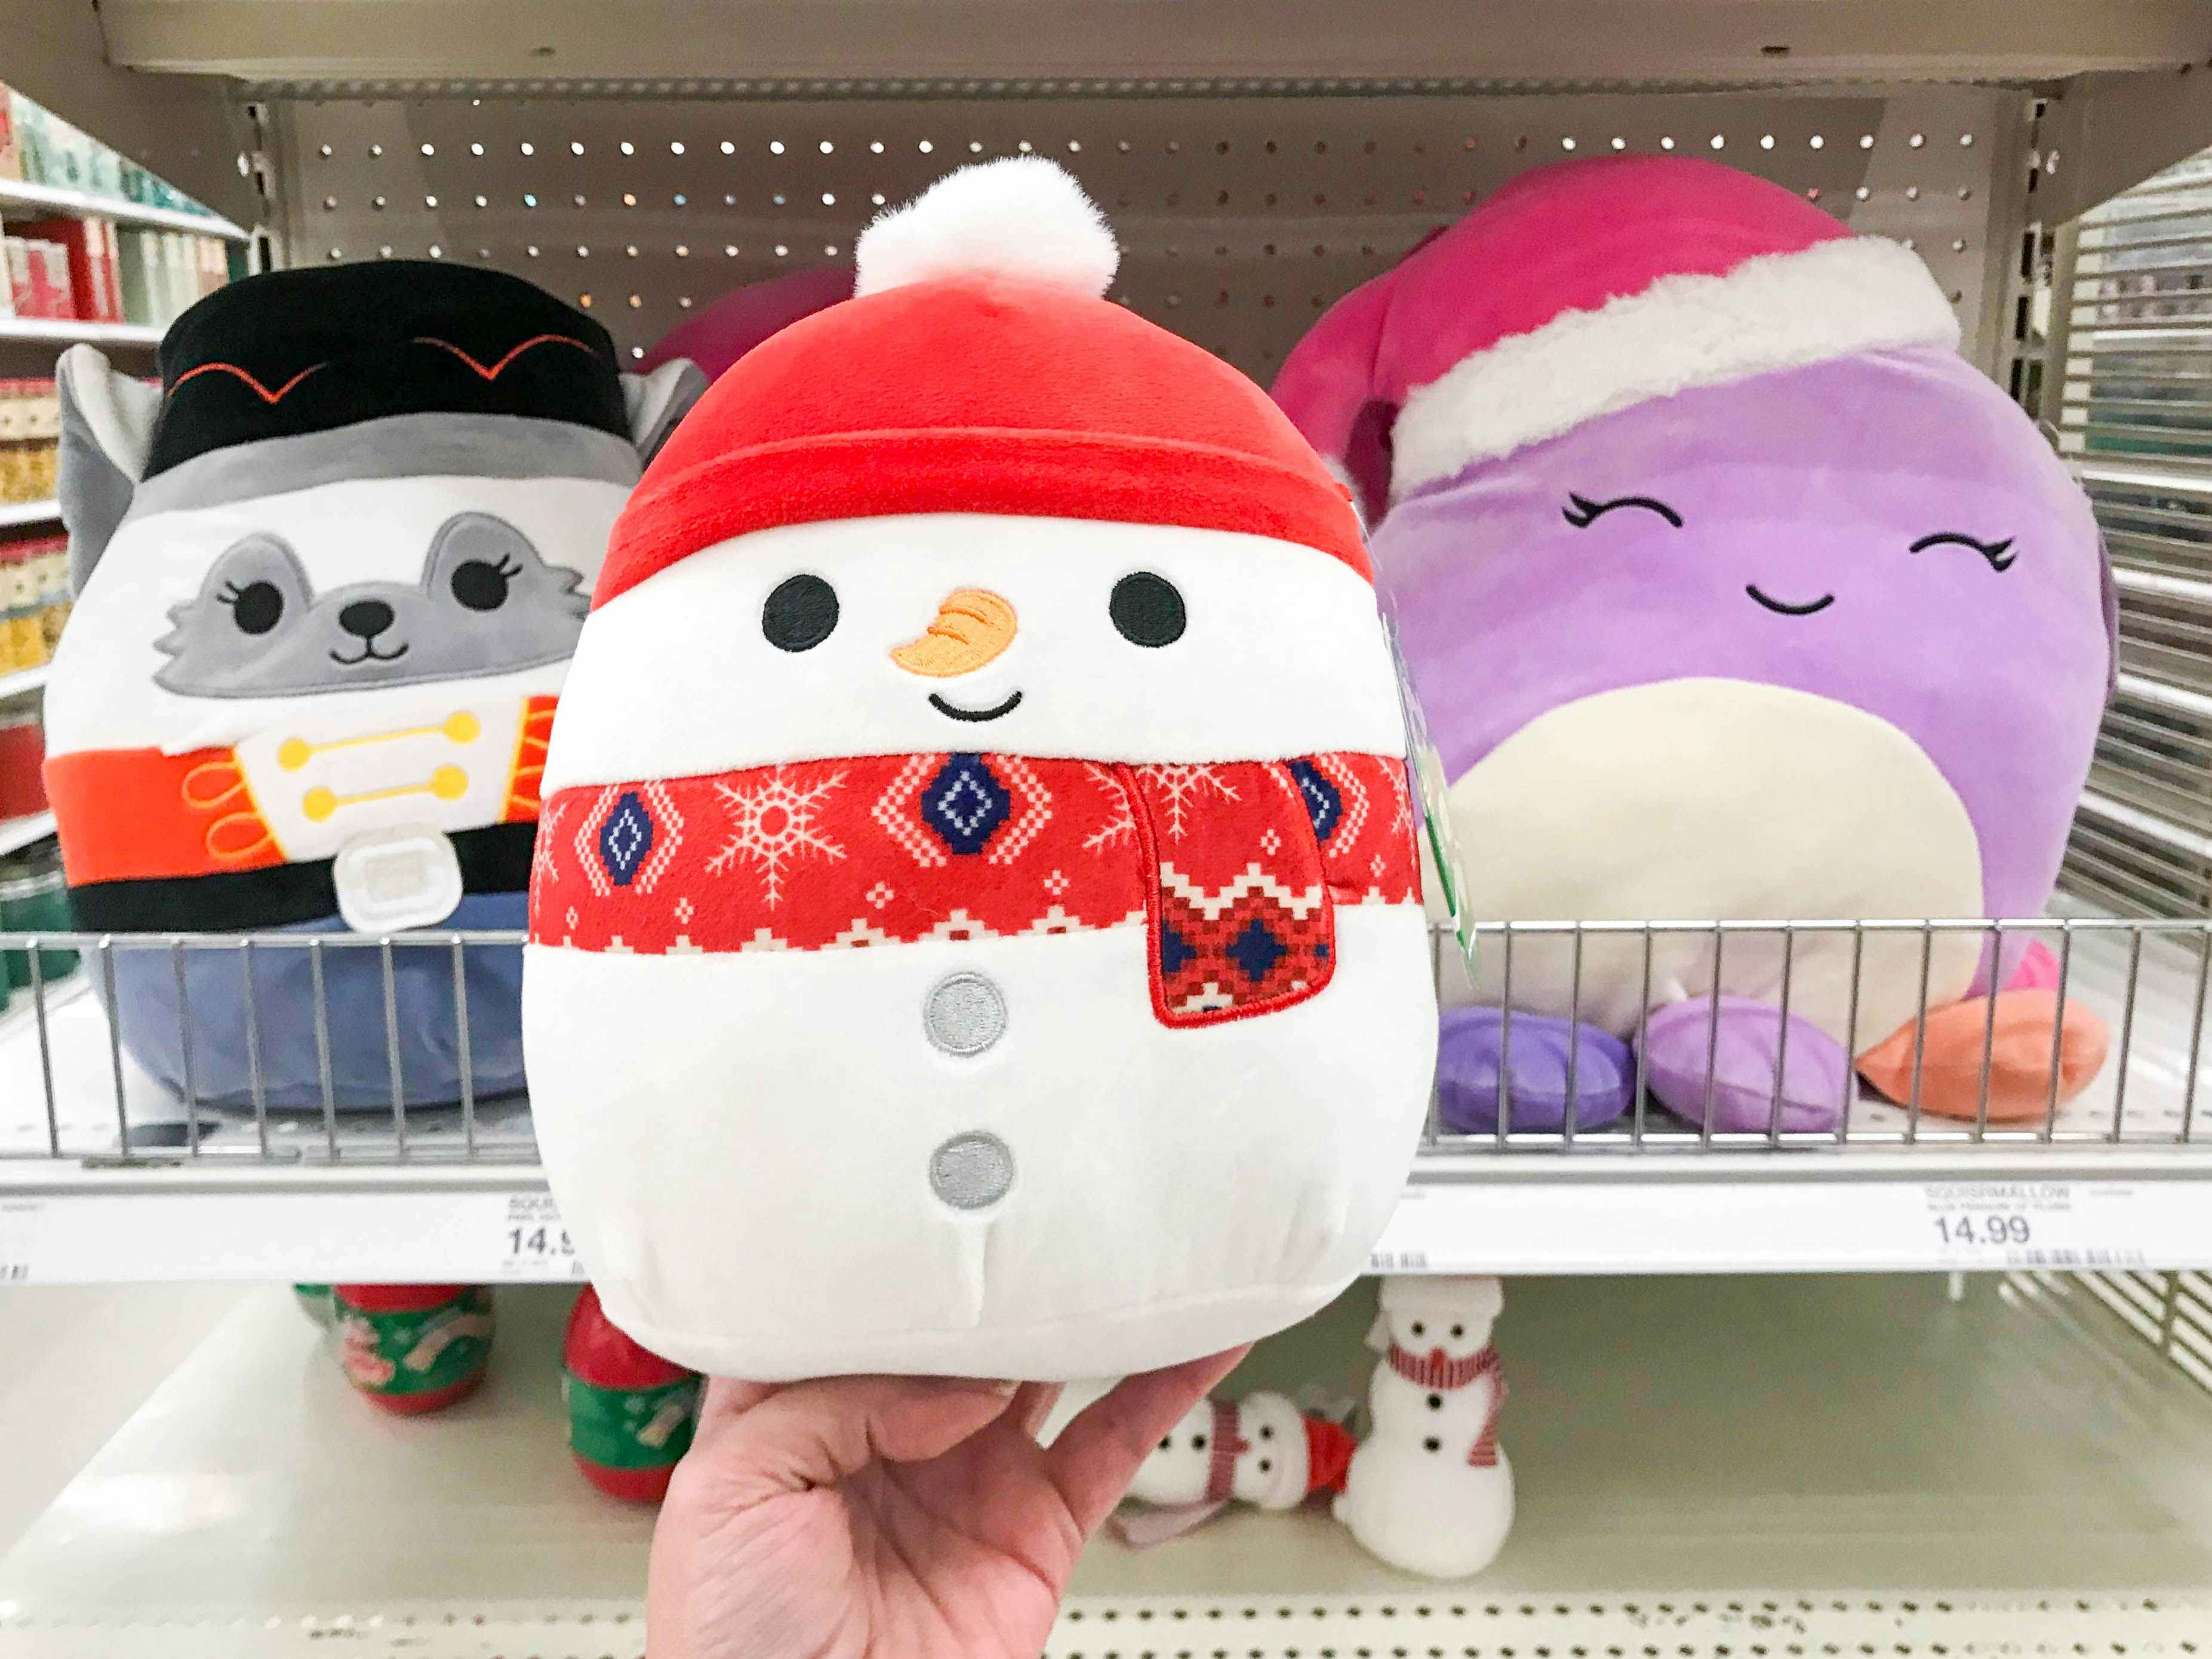 squishmallows on shelf in store